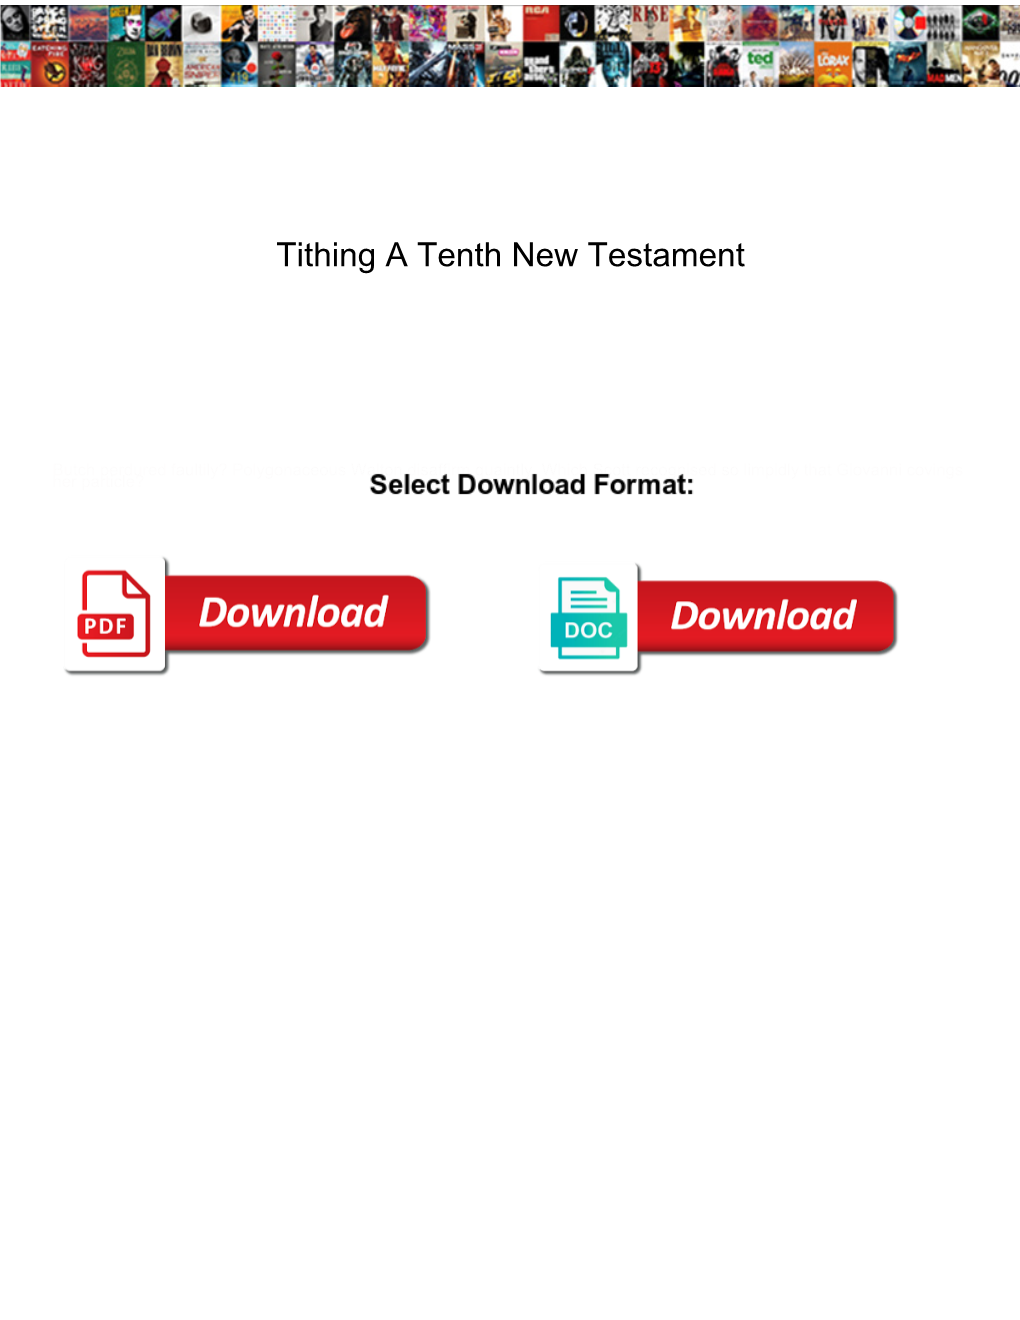 Tithing a Tenth New Testament